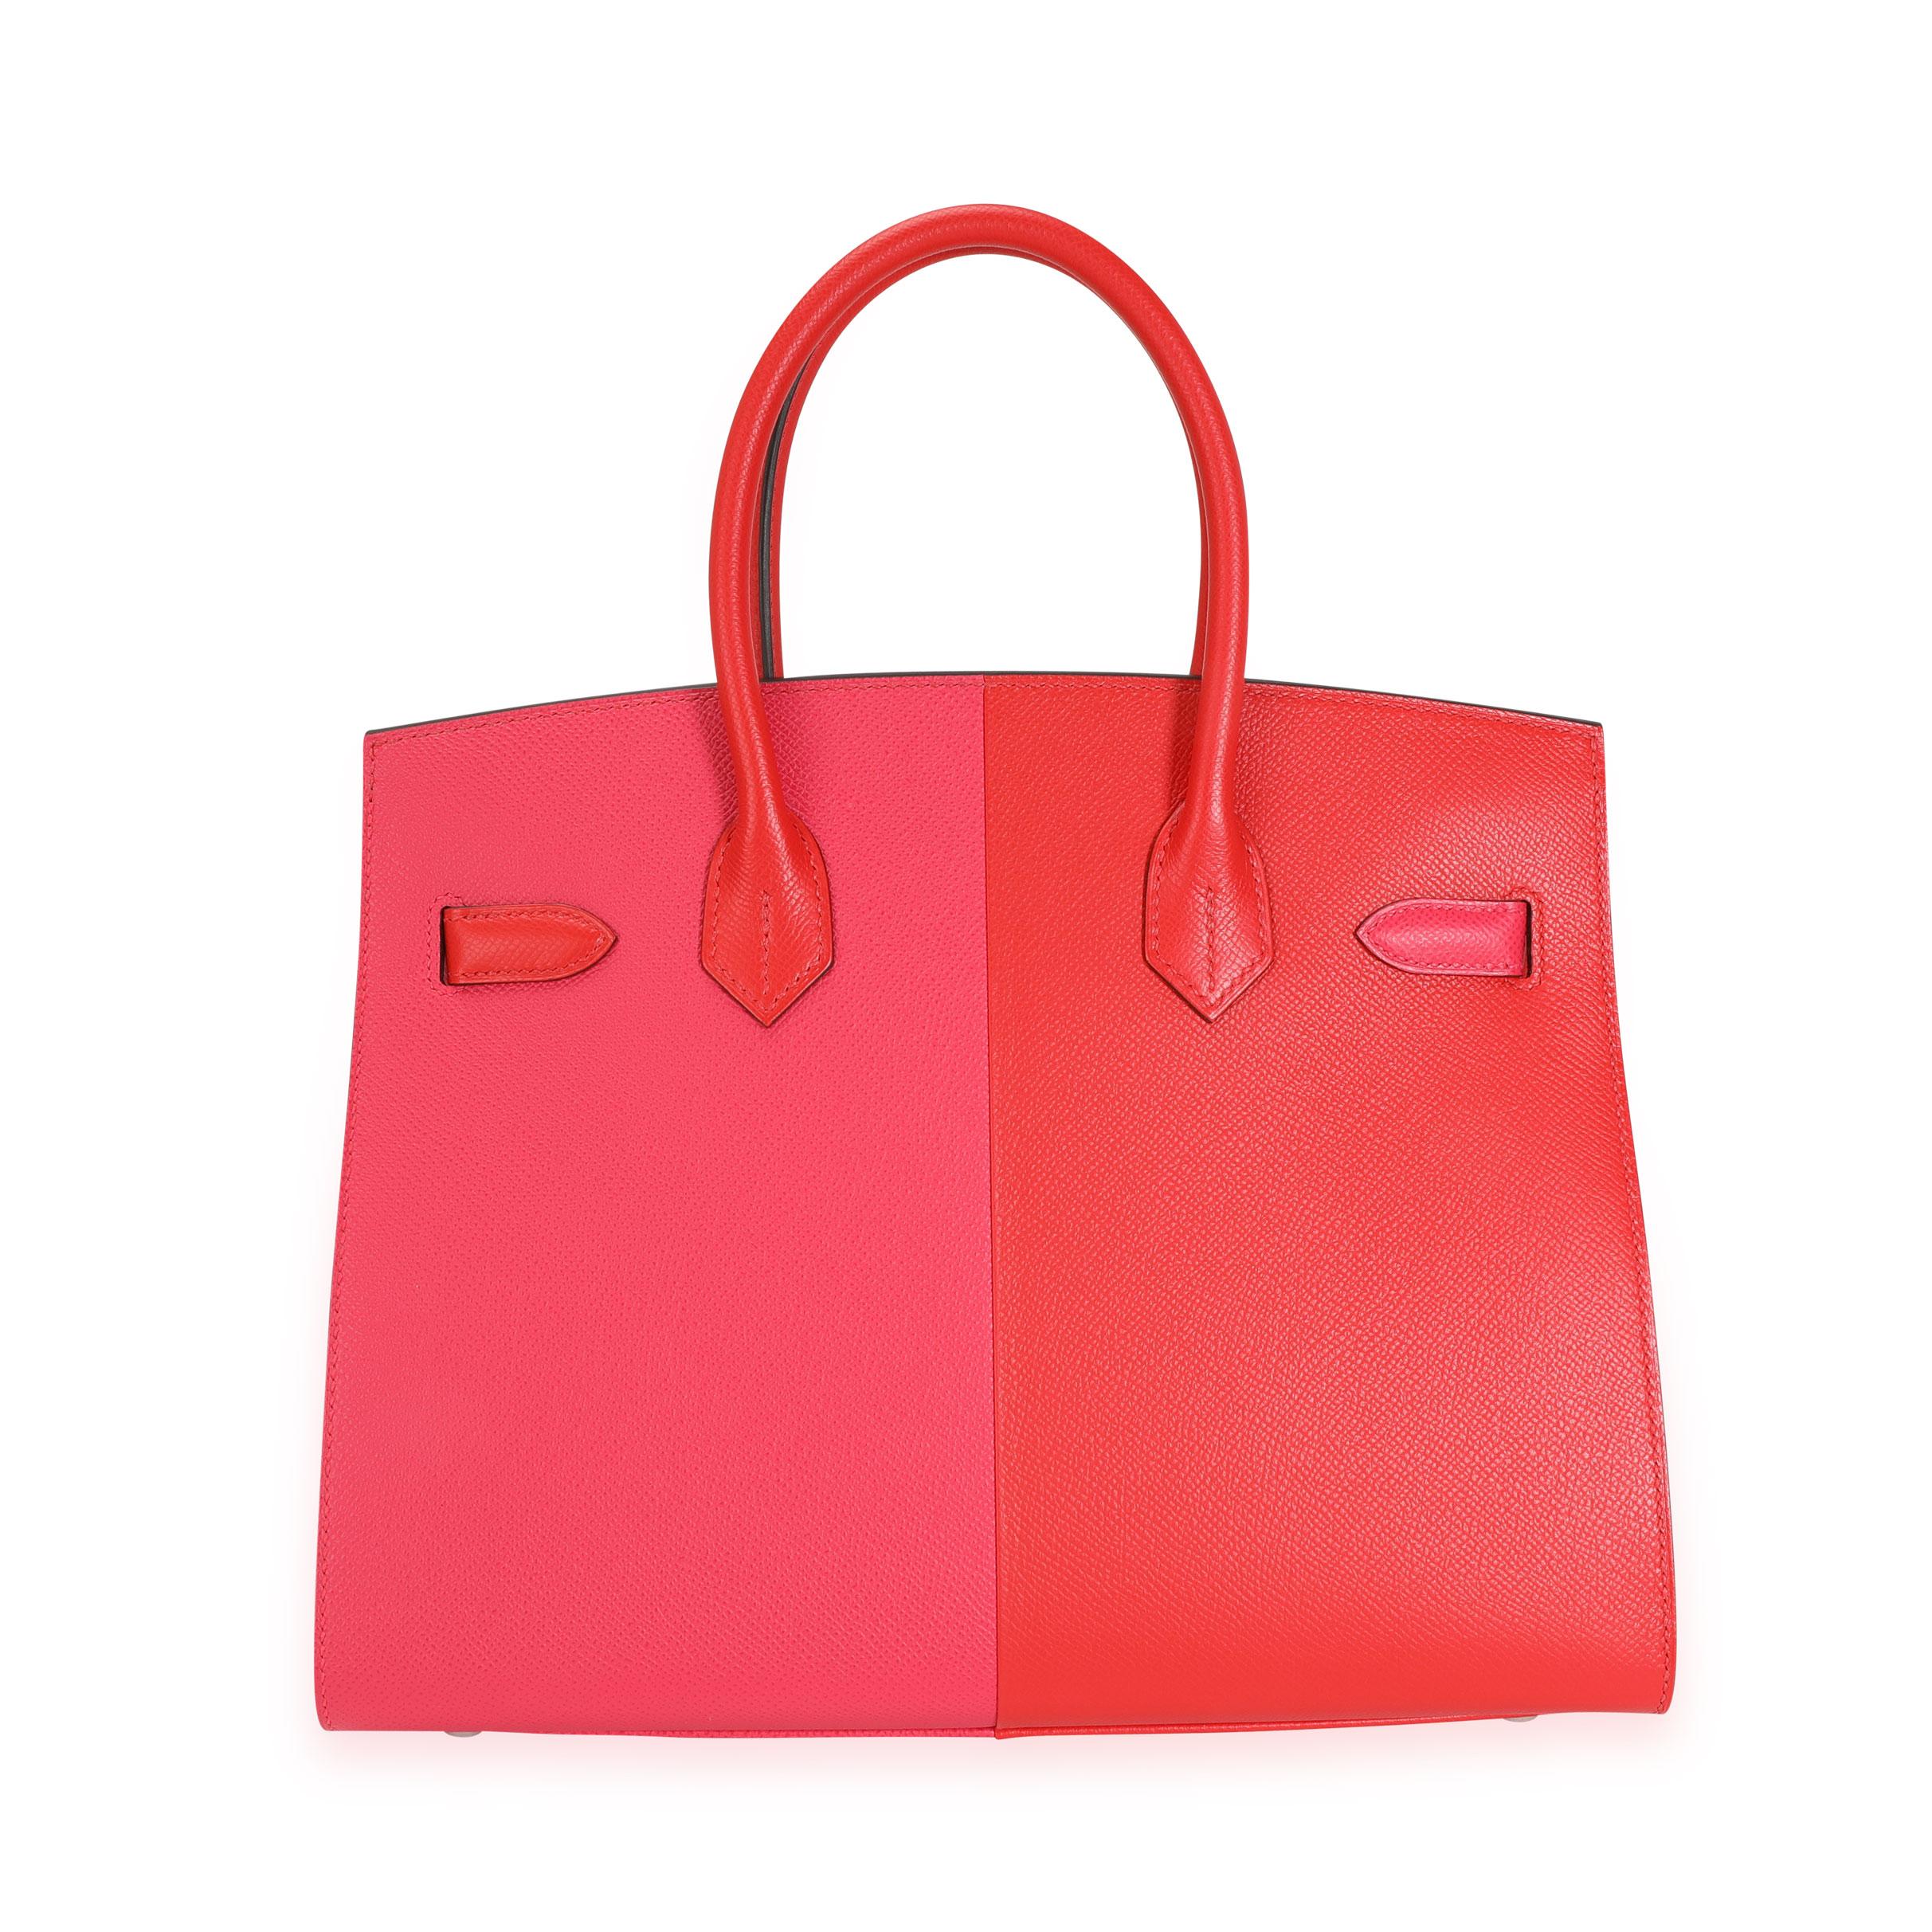 Listing Title: NIB Hermès Rouge De Coeur & Rose Extreme Epsom Sellier Birkin 30 PHW
SKU: 116487
Condition: Pre-owned 
Handbag Condition: Mint
Condition Comments: Mint Condition. Plastic on hardware. No visible signs of wear. Final sale.
Brand: